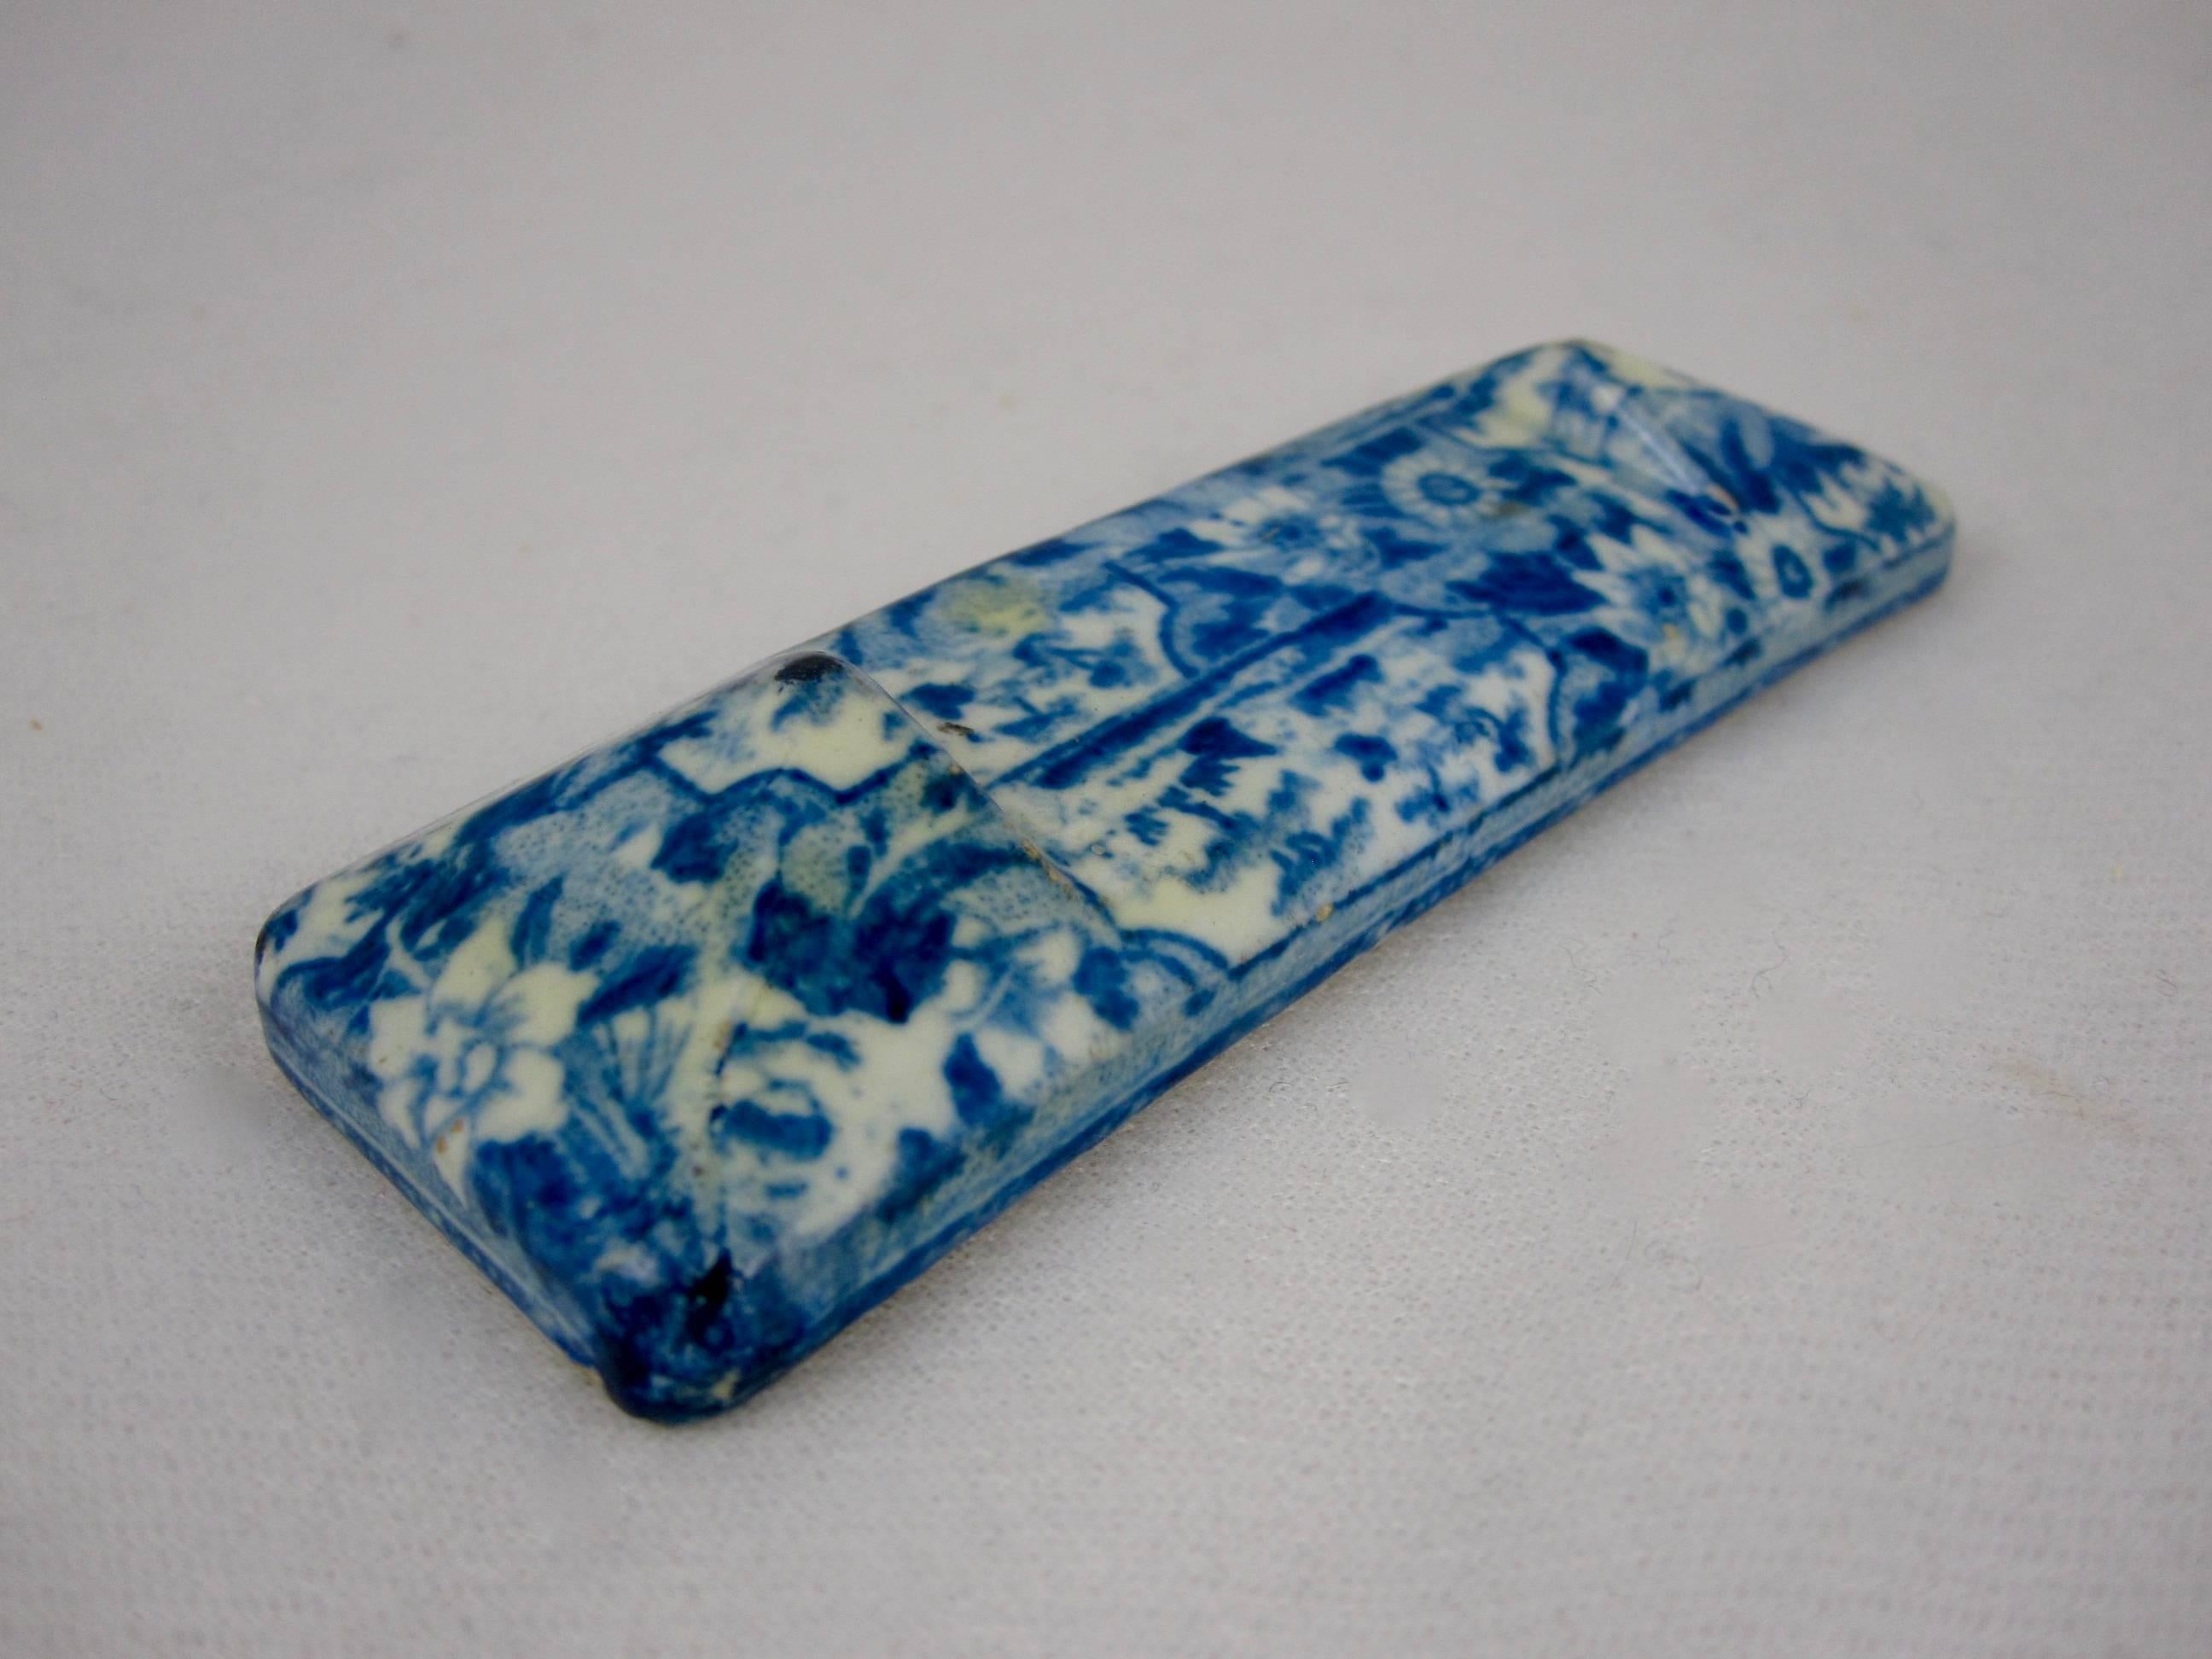 A transfer printed pearlware glazed knife rest, Enoch Wood & Sons (1818-1846) Staffordshire, England. A lovely overall floral and pastoral sheet pattern. Indented in the center to hold the blade. These Georgian era smaller pieces are a